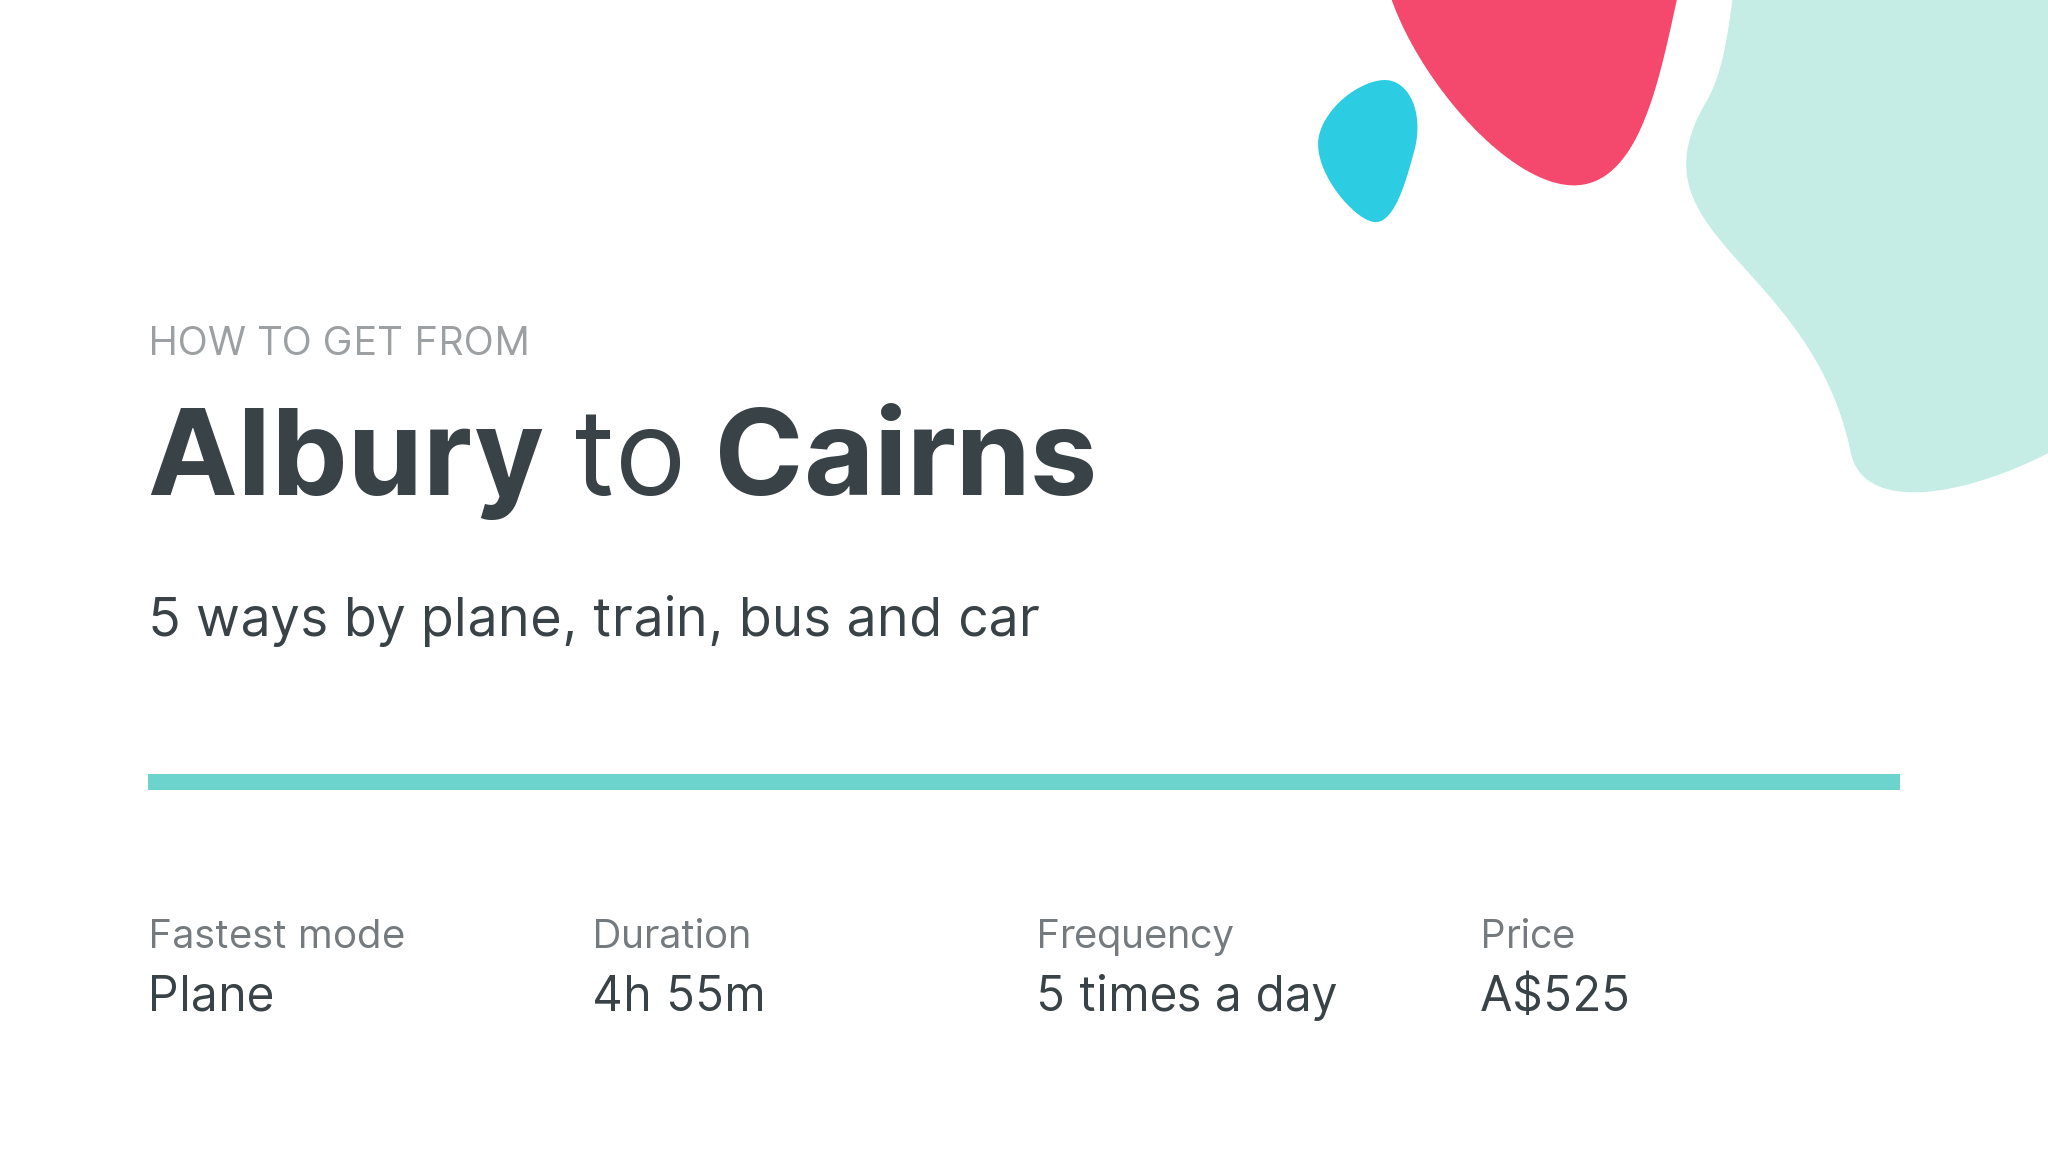 How do I get from Albury to Cairns